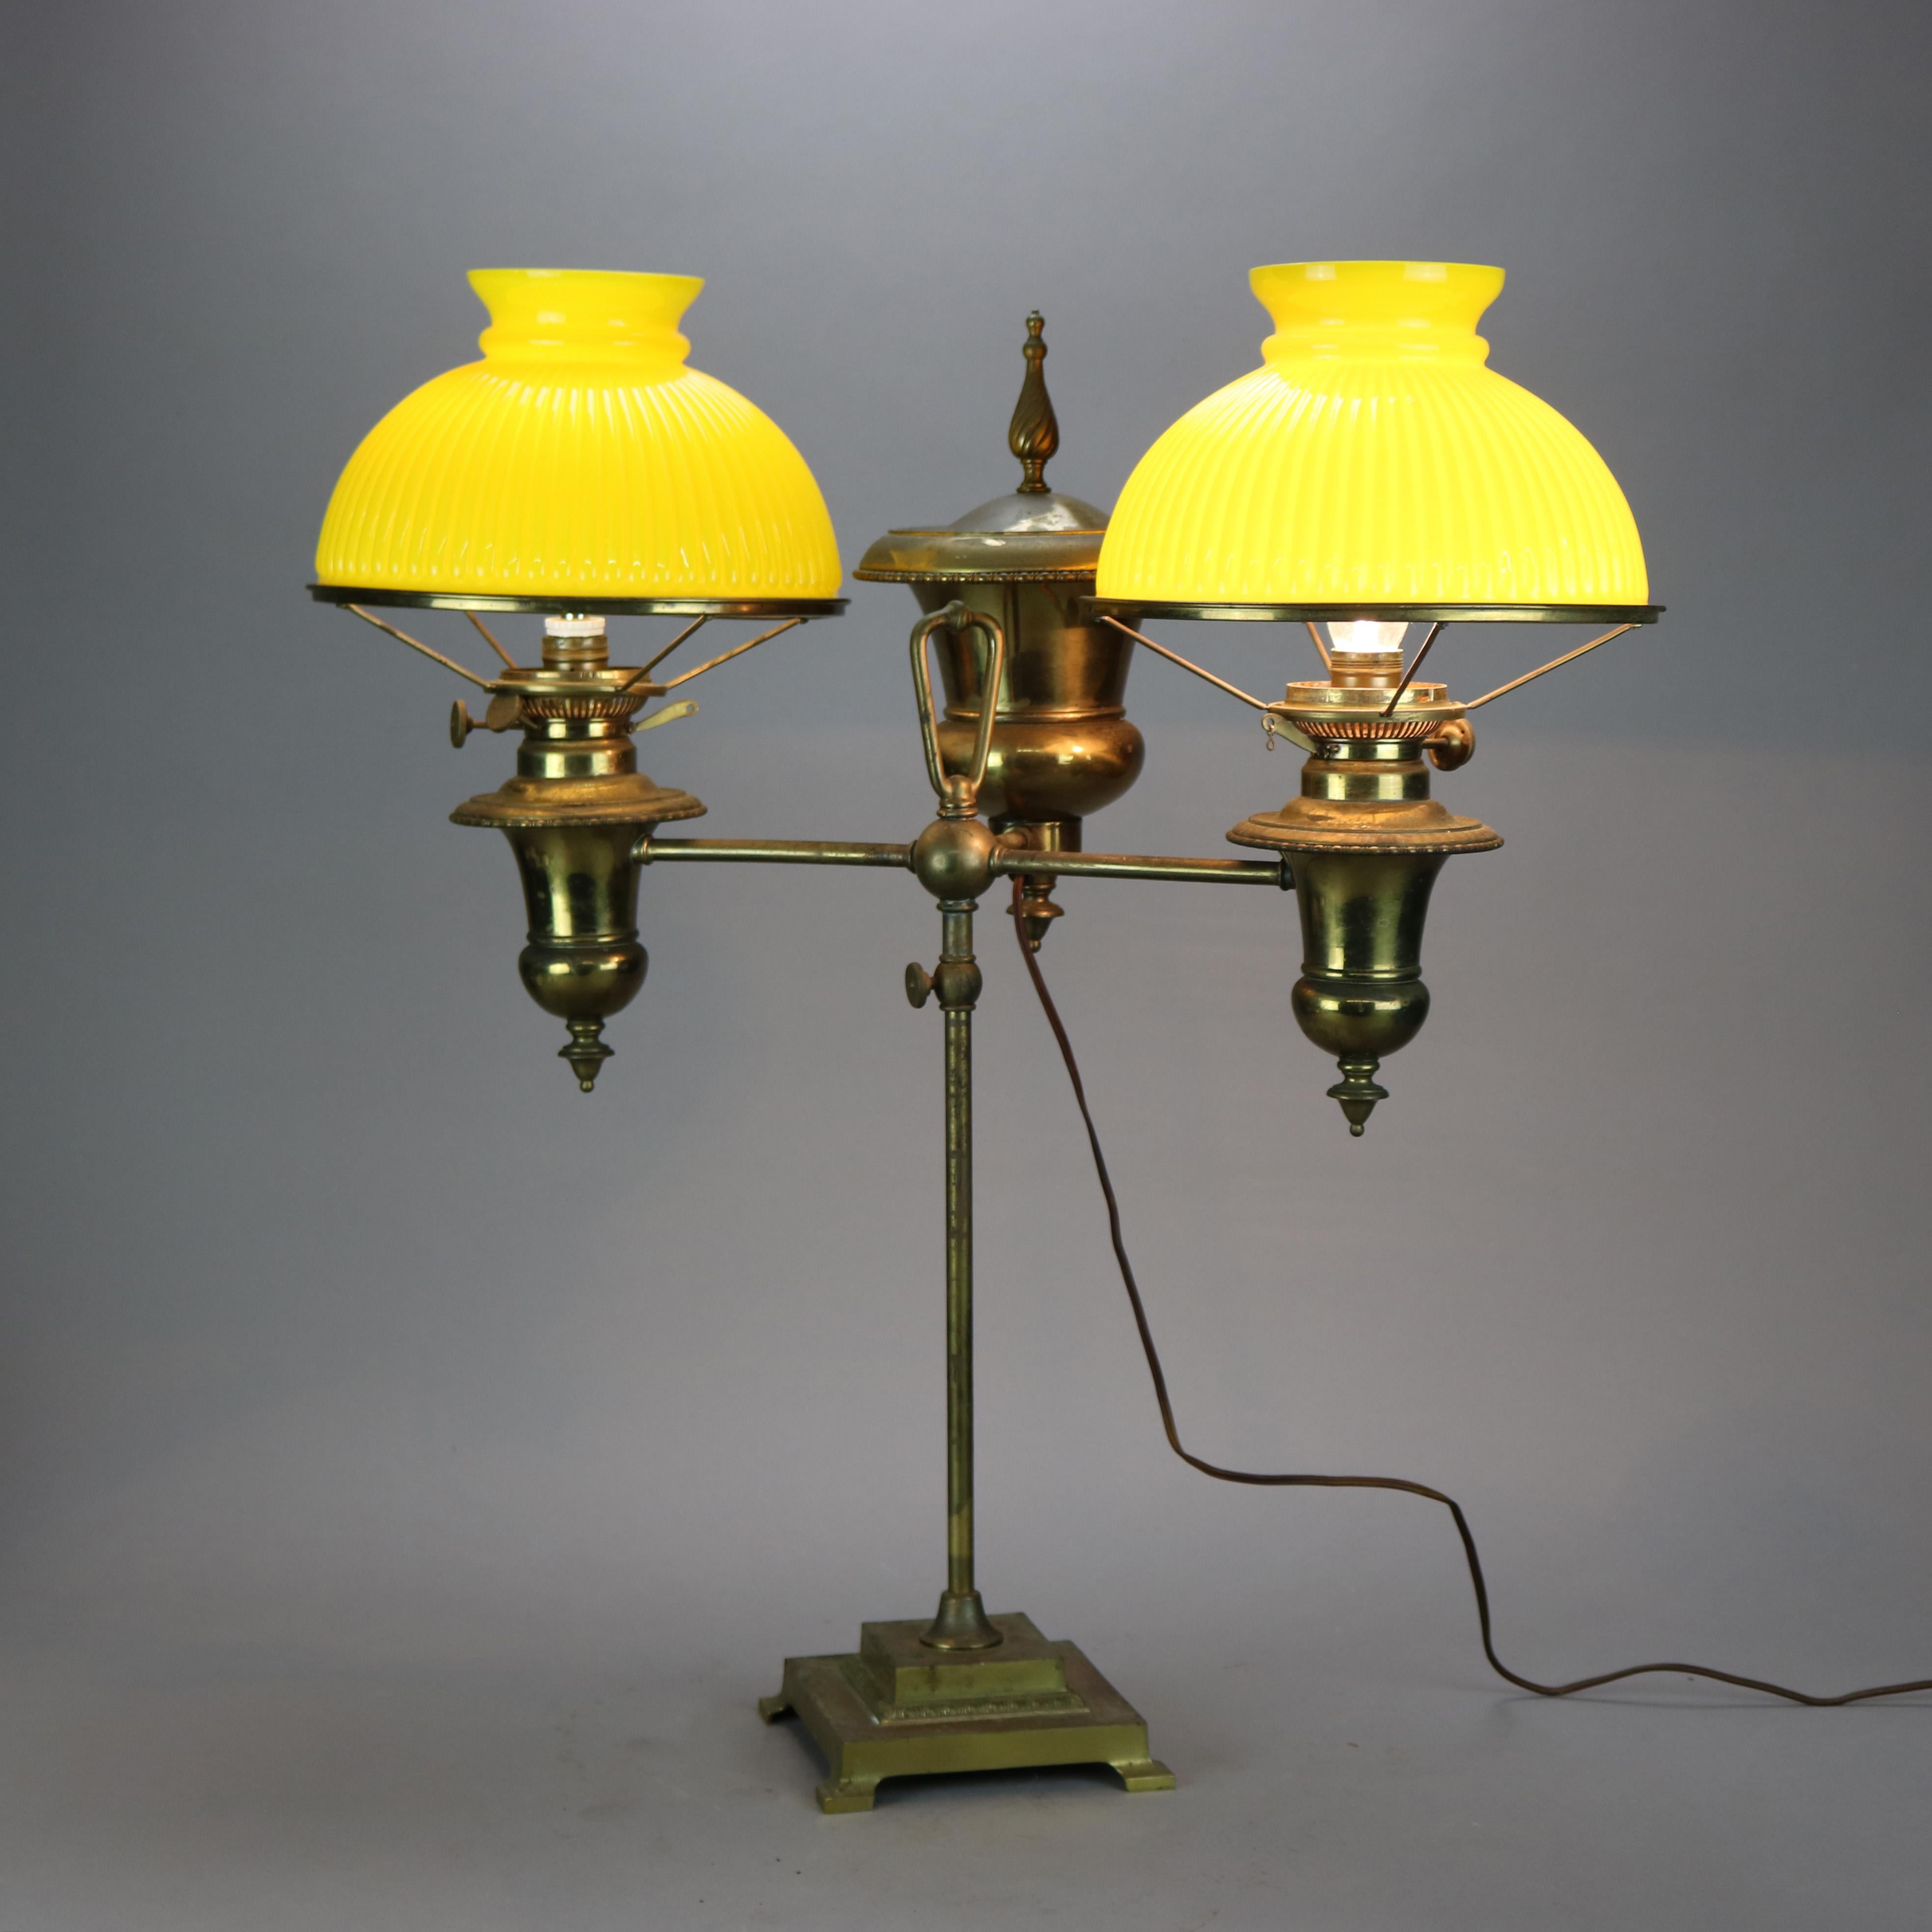 An antique double student lamp by Bradley and Hubbard offers brass frame with urn form fonts, one having stylized flame finial, on shaft with adjustable arms terminating on lights with ribbed yellow cased glass shades, electrified, maker mark as